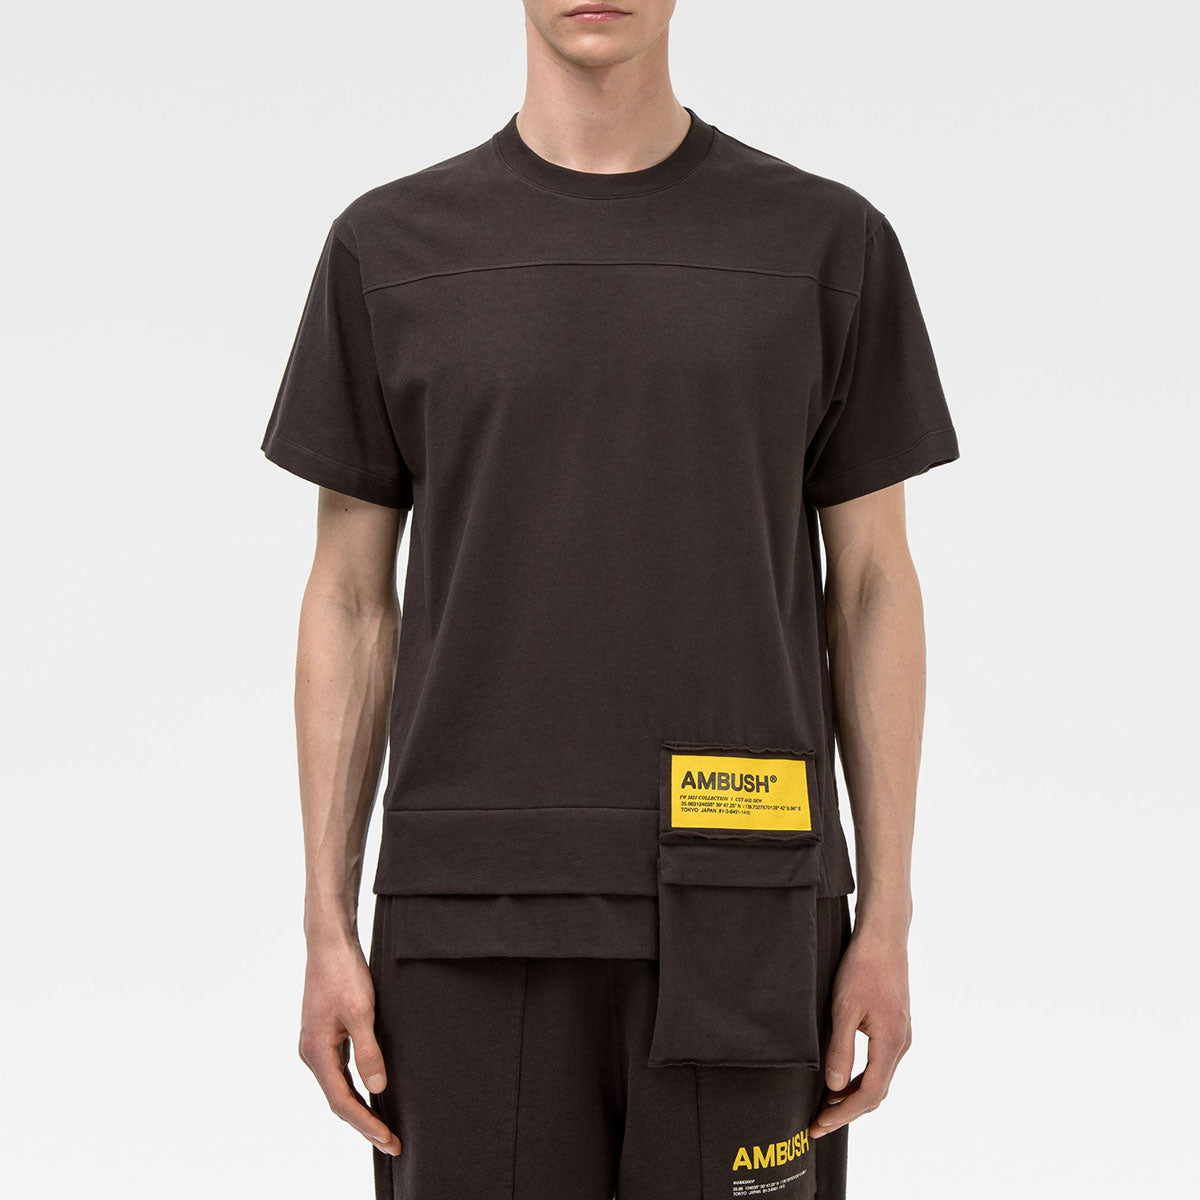 WAIST POCKET T-SHIRT - Why are you here?